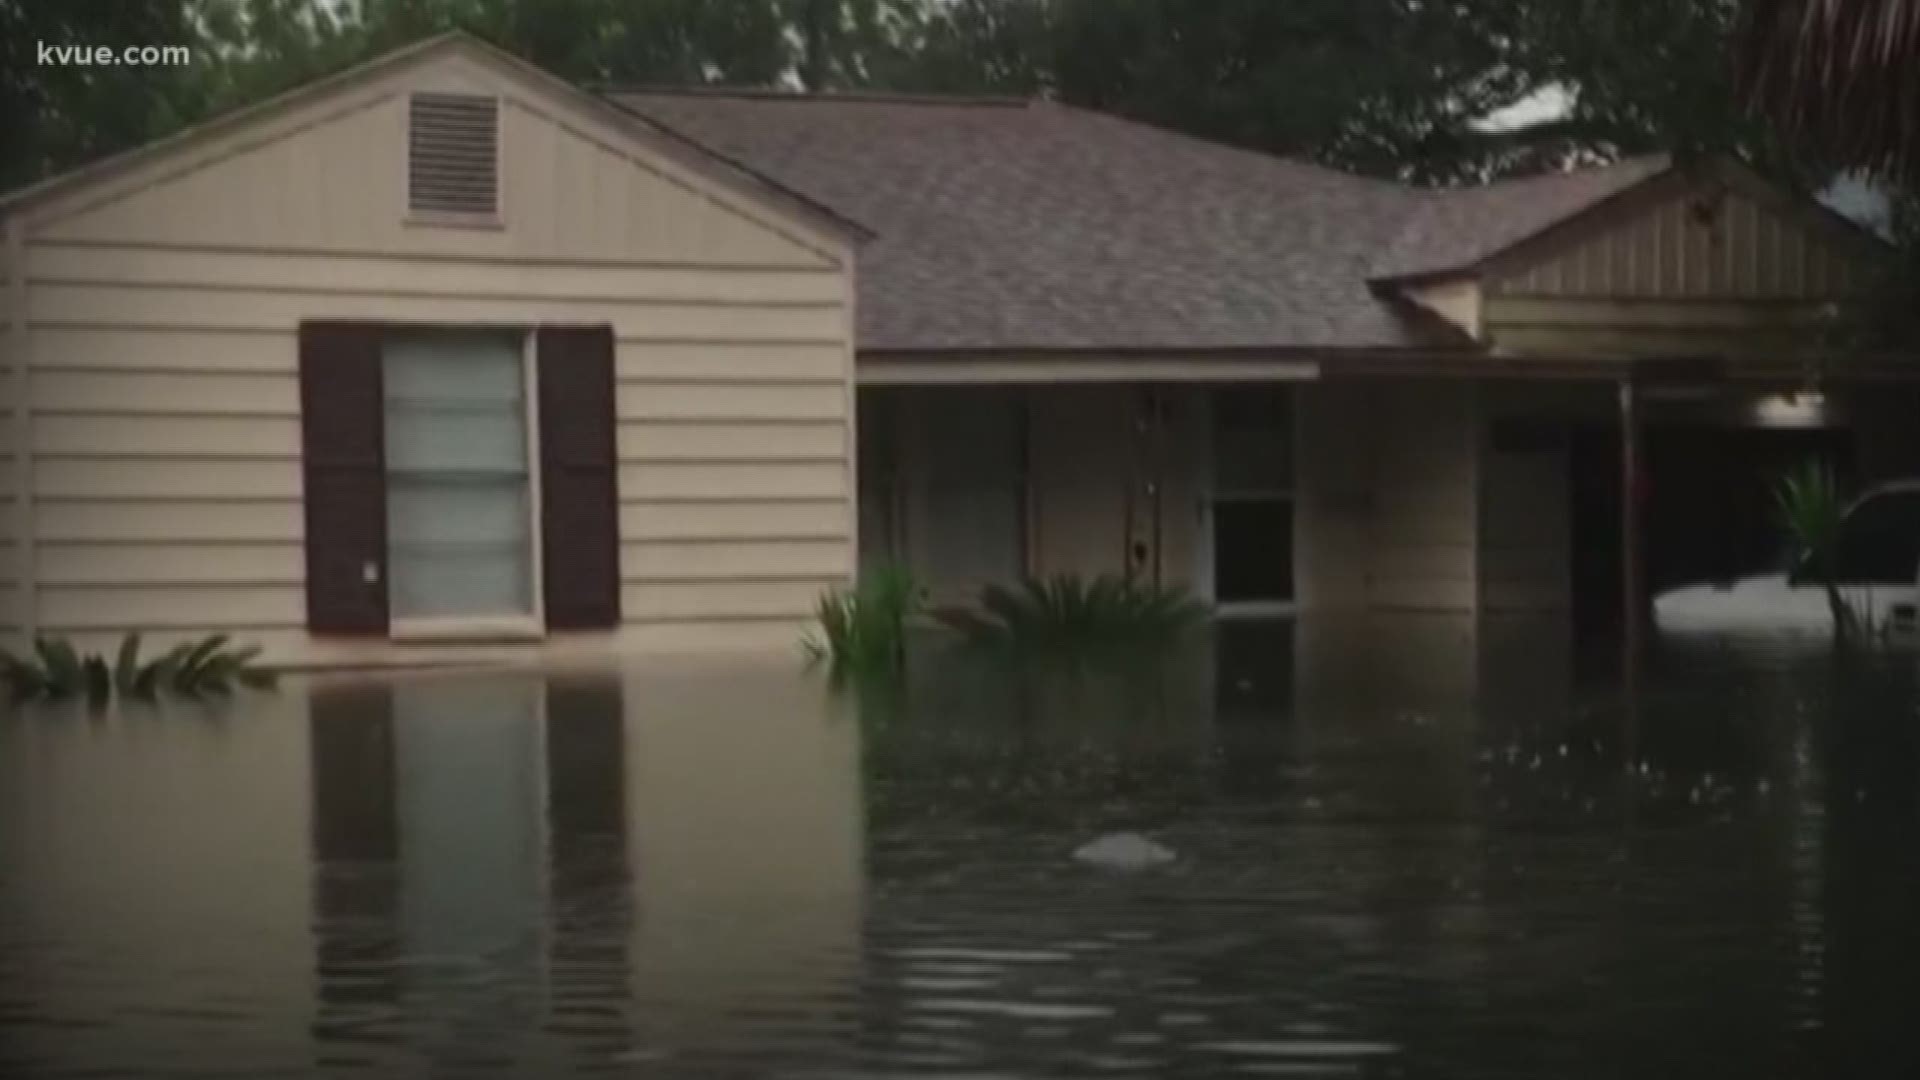 KVUE's Juan Rodriguez shares his own experience of losing his childhood home to the devastation of Hurricane Harvey.